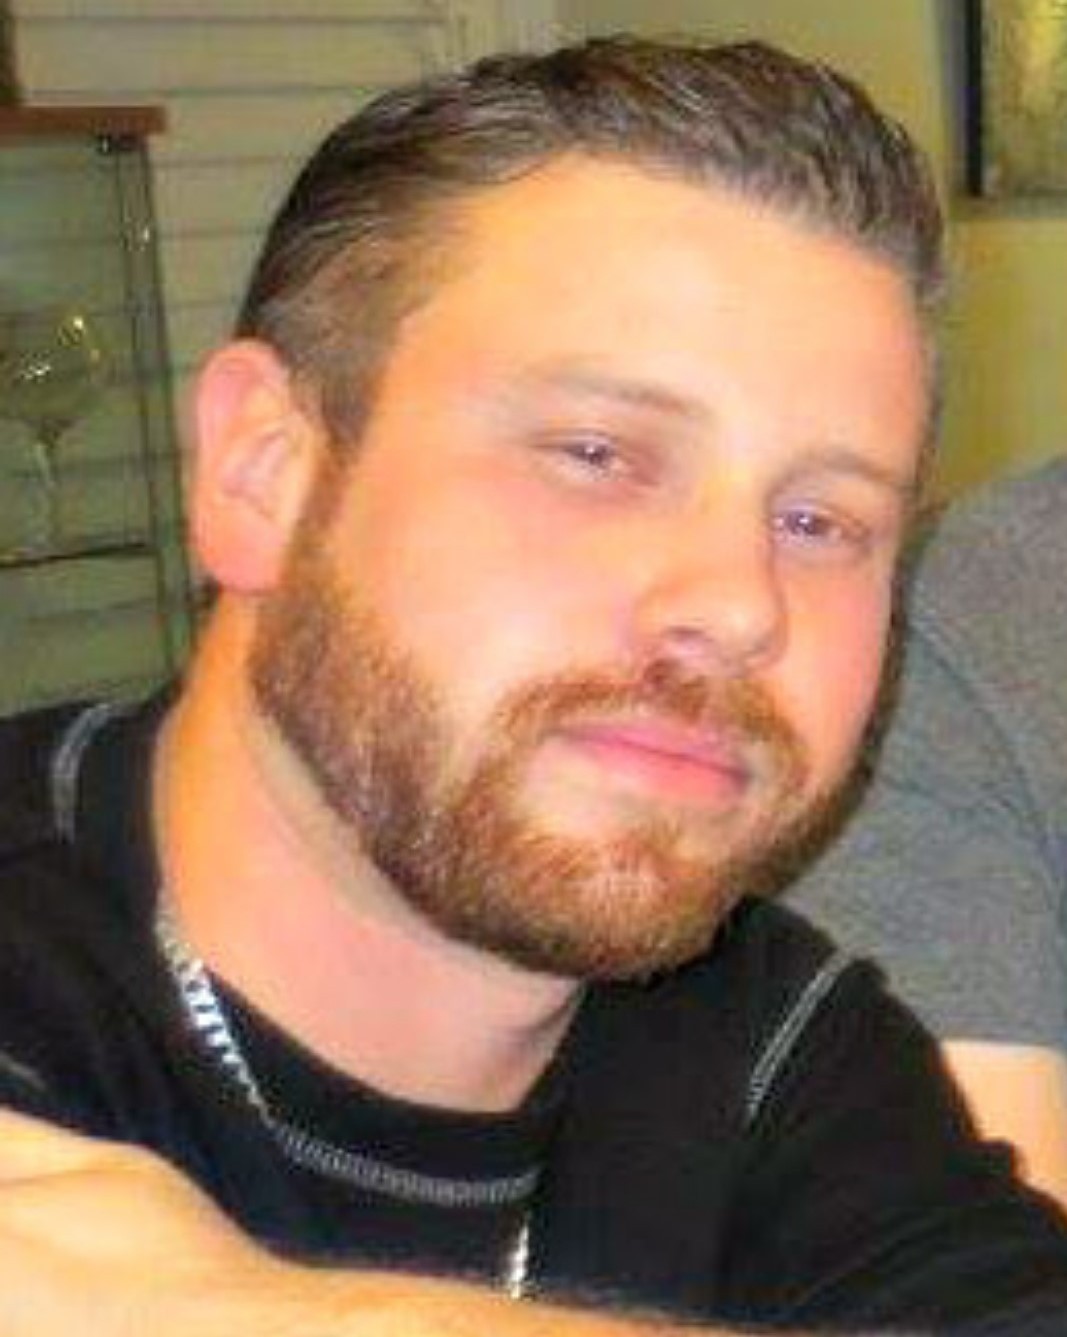 Police have identified the victim as 34-year-old Jason Rumley from Caledon, Ont.